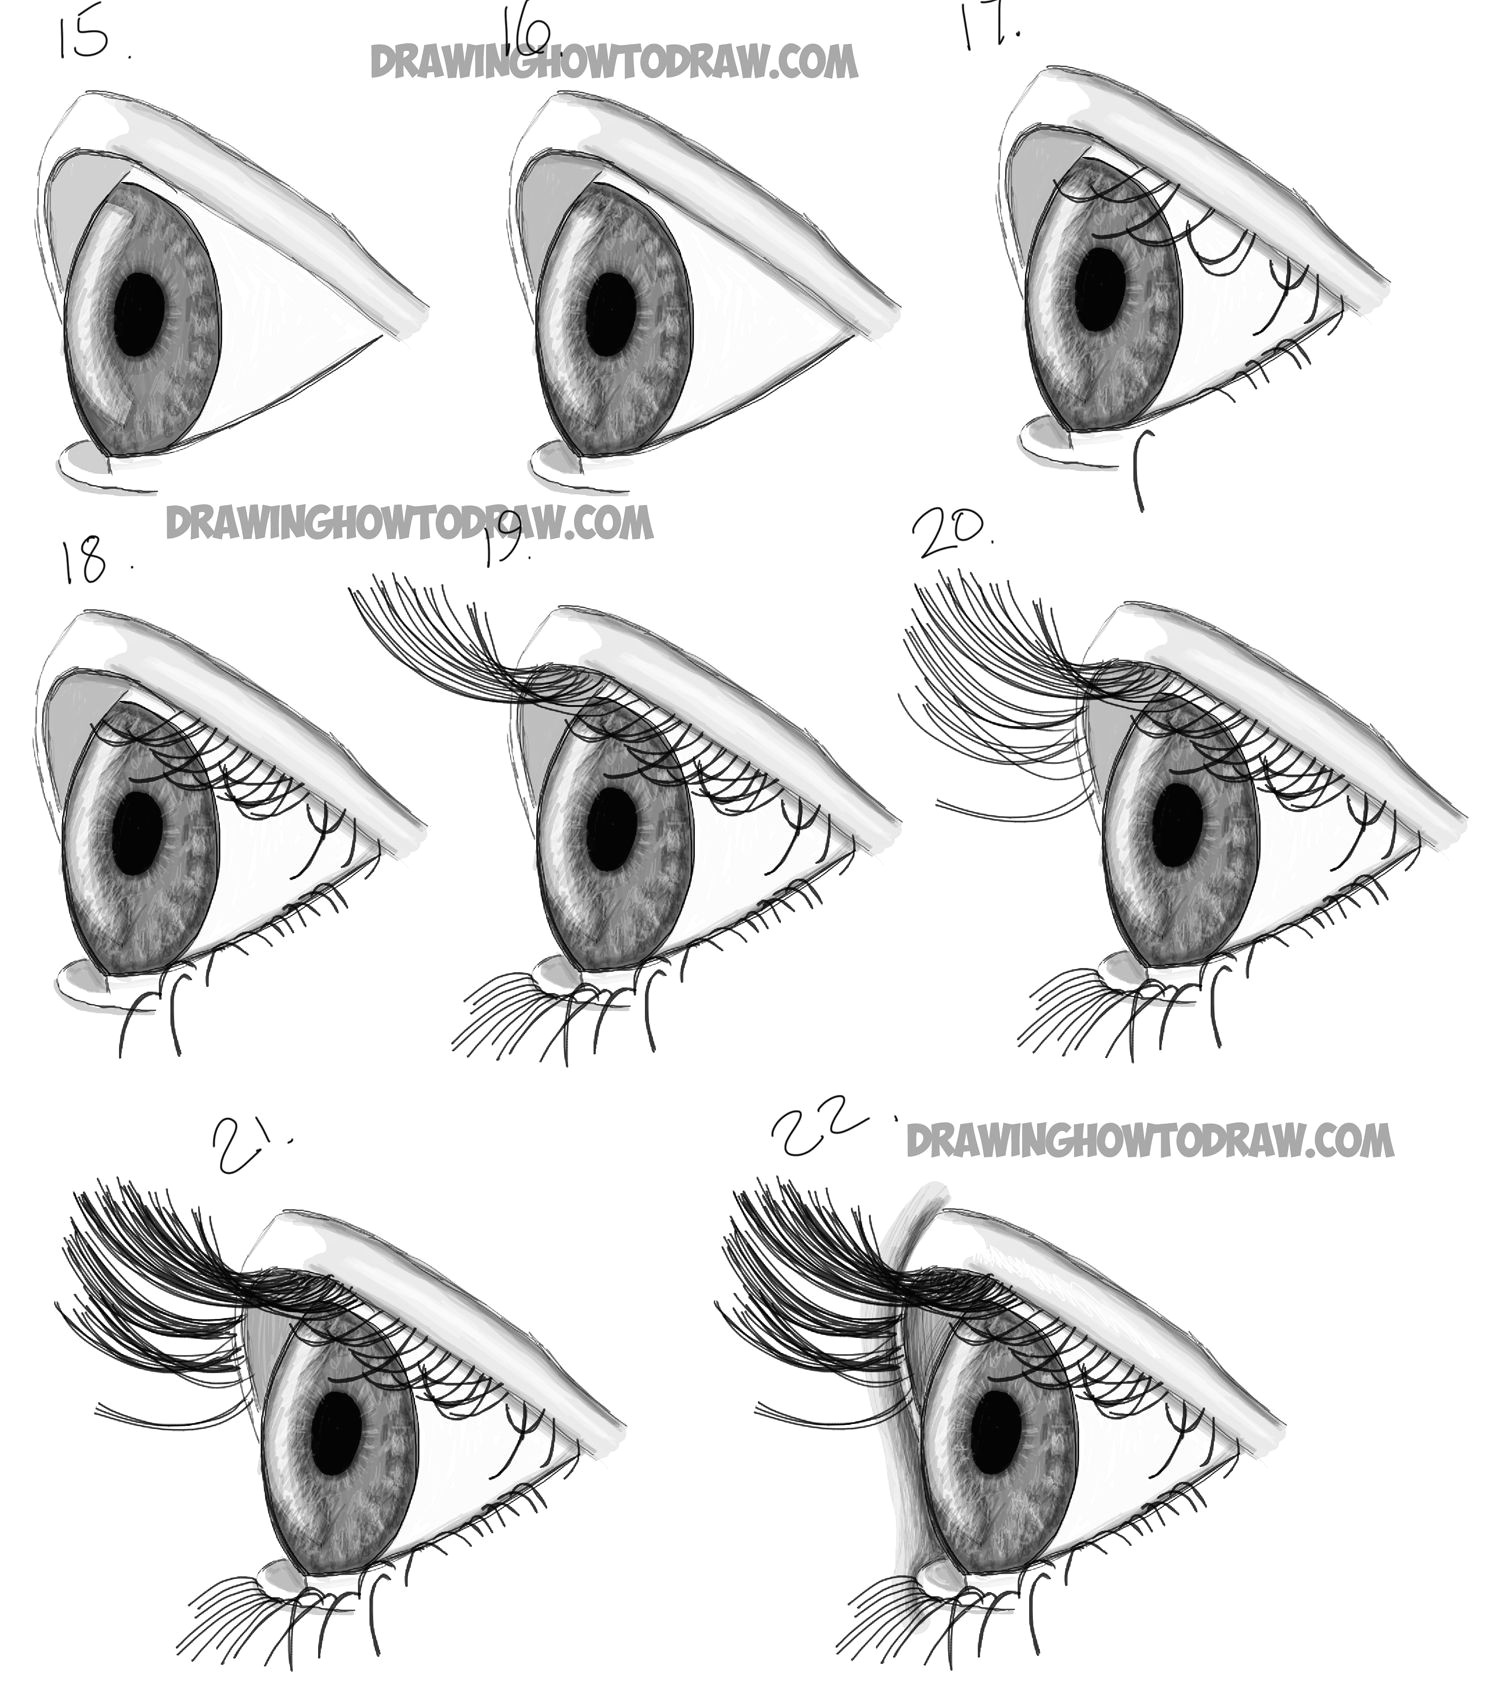 Drawing Eyes From the Side Sketch How to Draw Realistic Eyes From the Side Profile View Step by Step